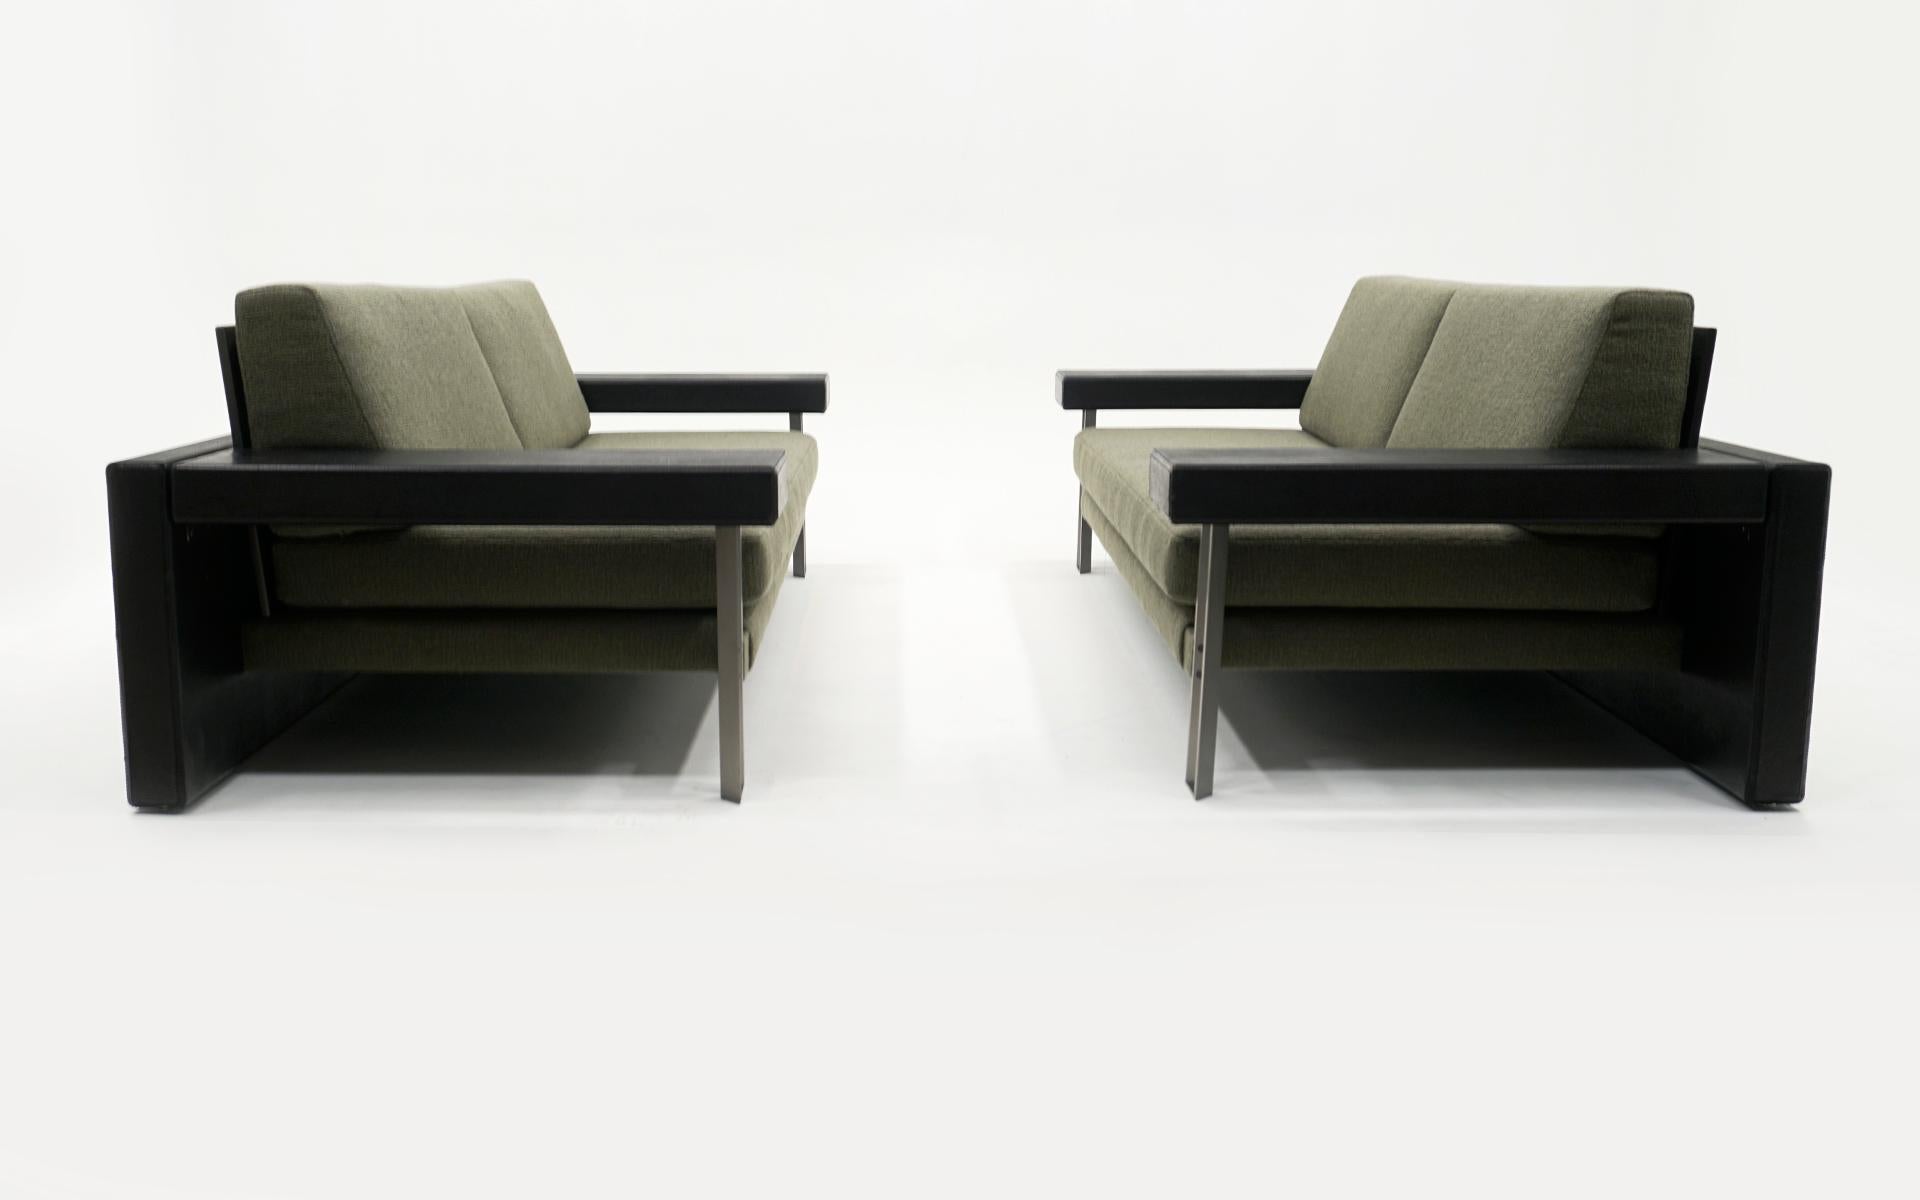 Italian Pair of Sofas by Giovanni Offredi for Saporiti, Italy, 1970s.  Ready to Use.